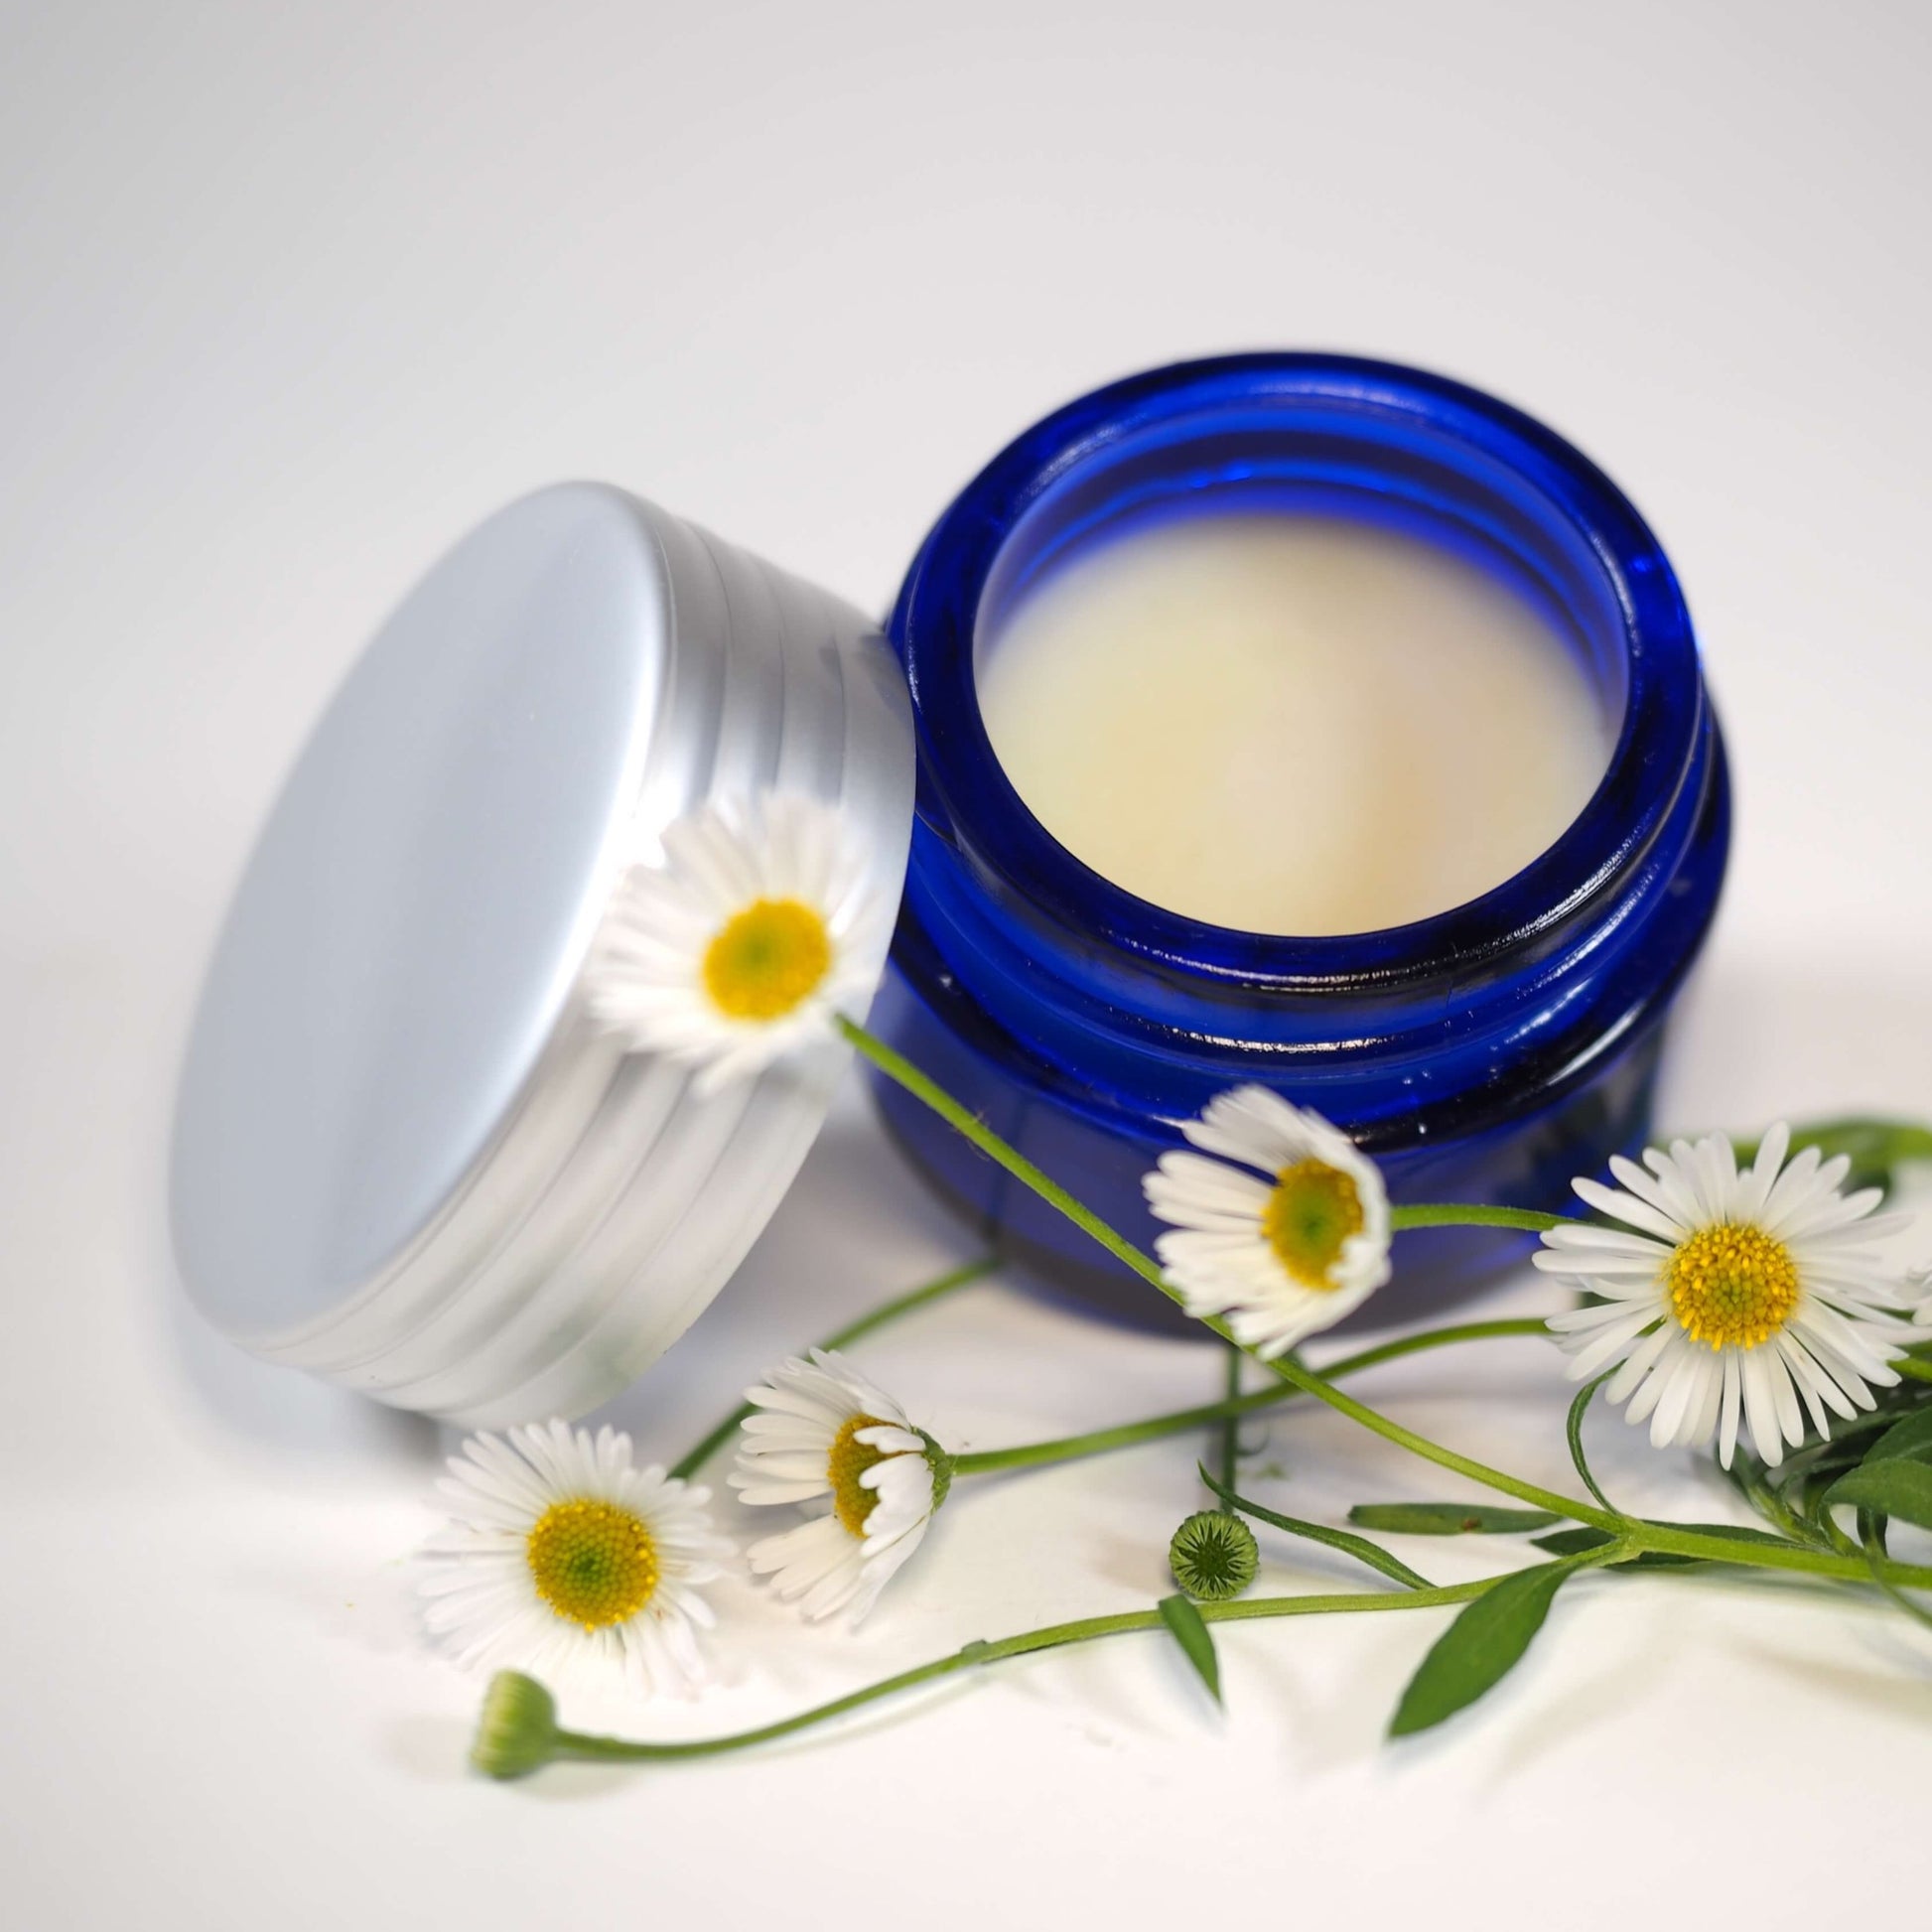 Honey Argan Lip Balm open with lid and daisies